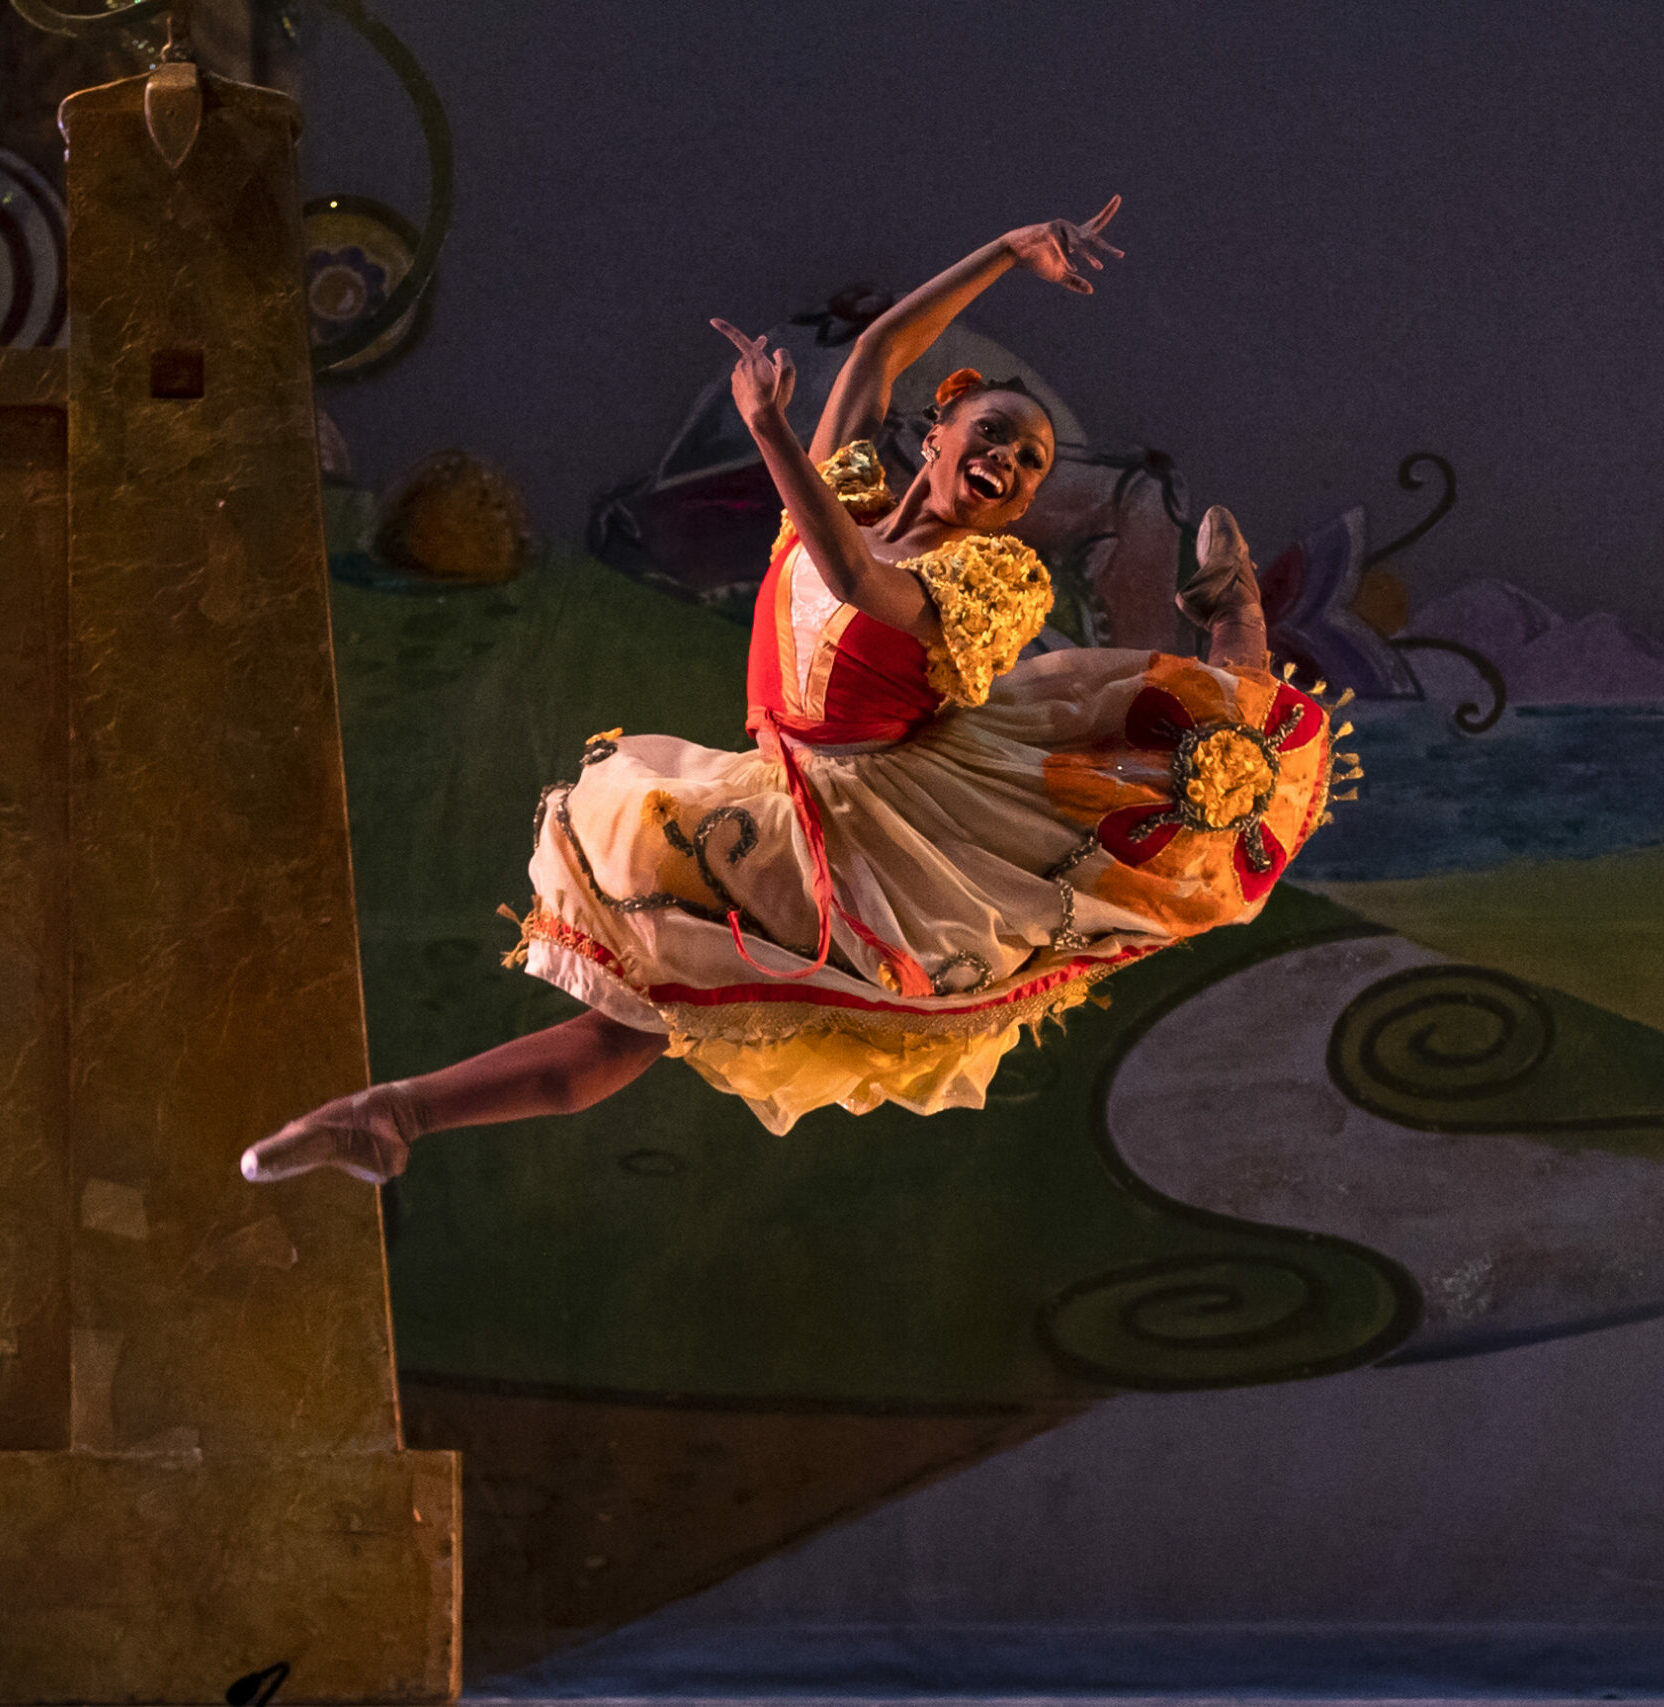 Dancer performing a leap in an orange and red costume